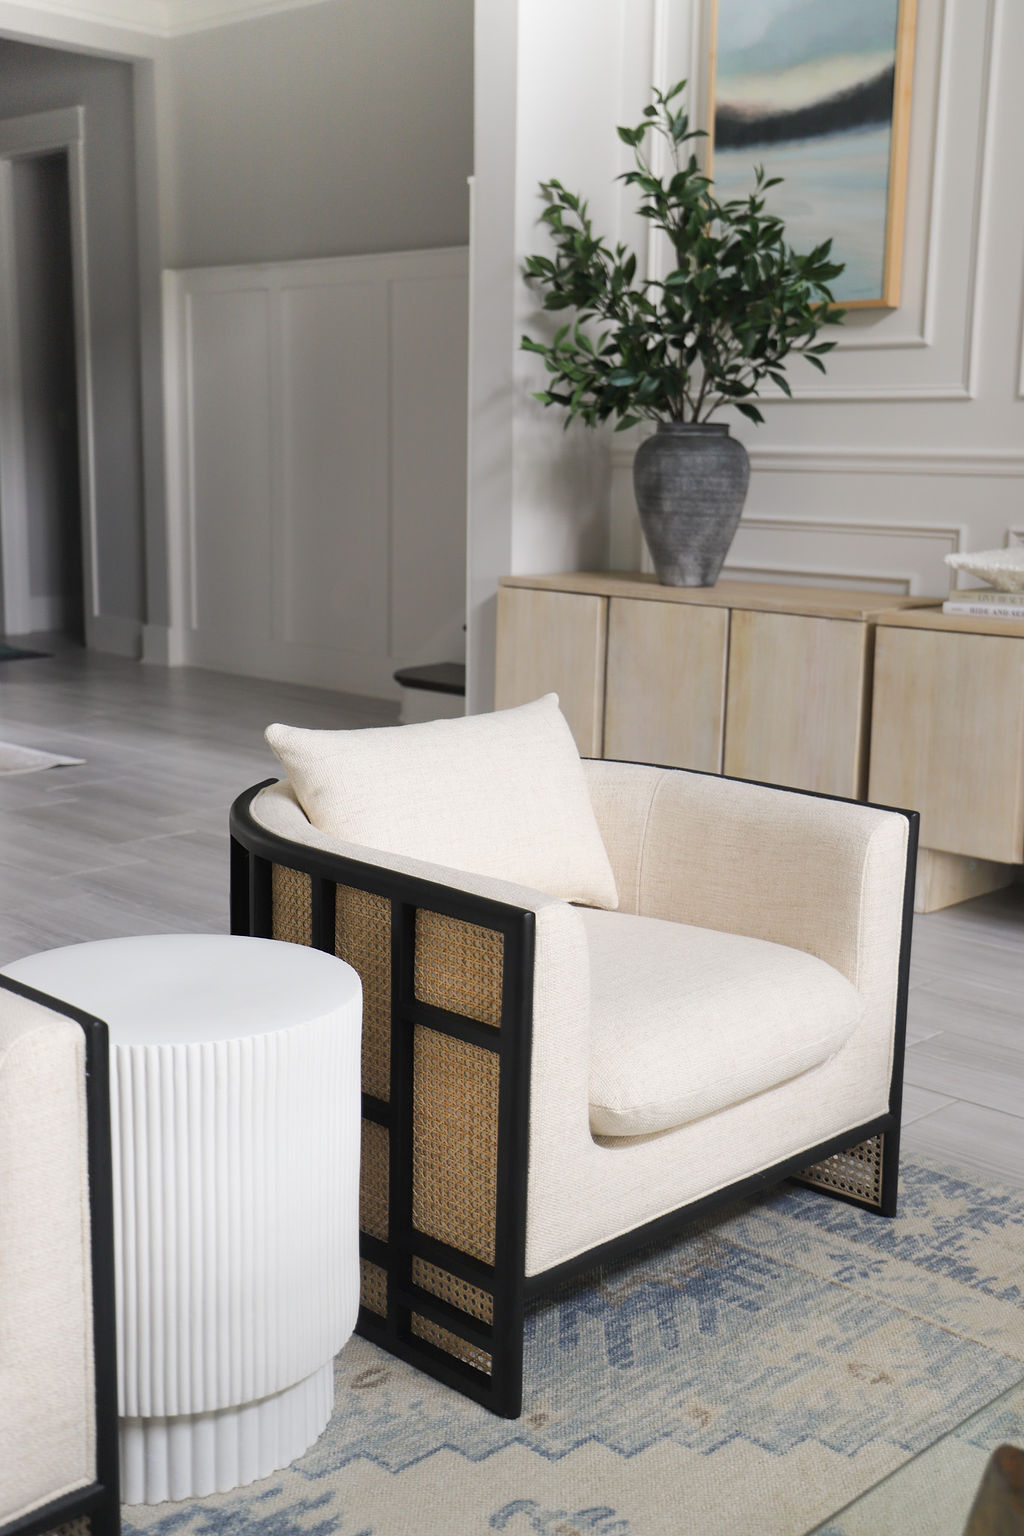 This chair has a woven back and dark wood with white beige cushions. The side table is fluted. Both fit into this modern coastal living room.